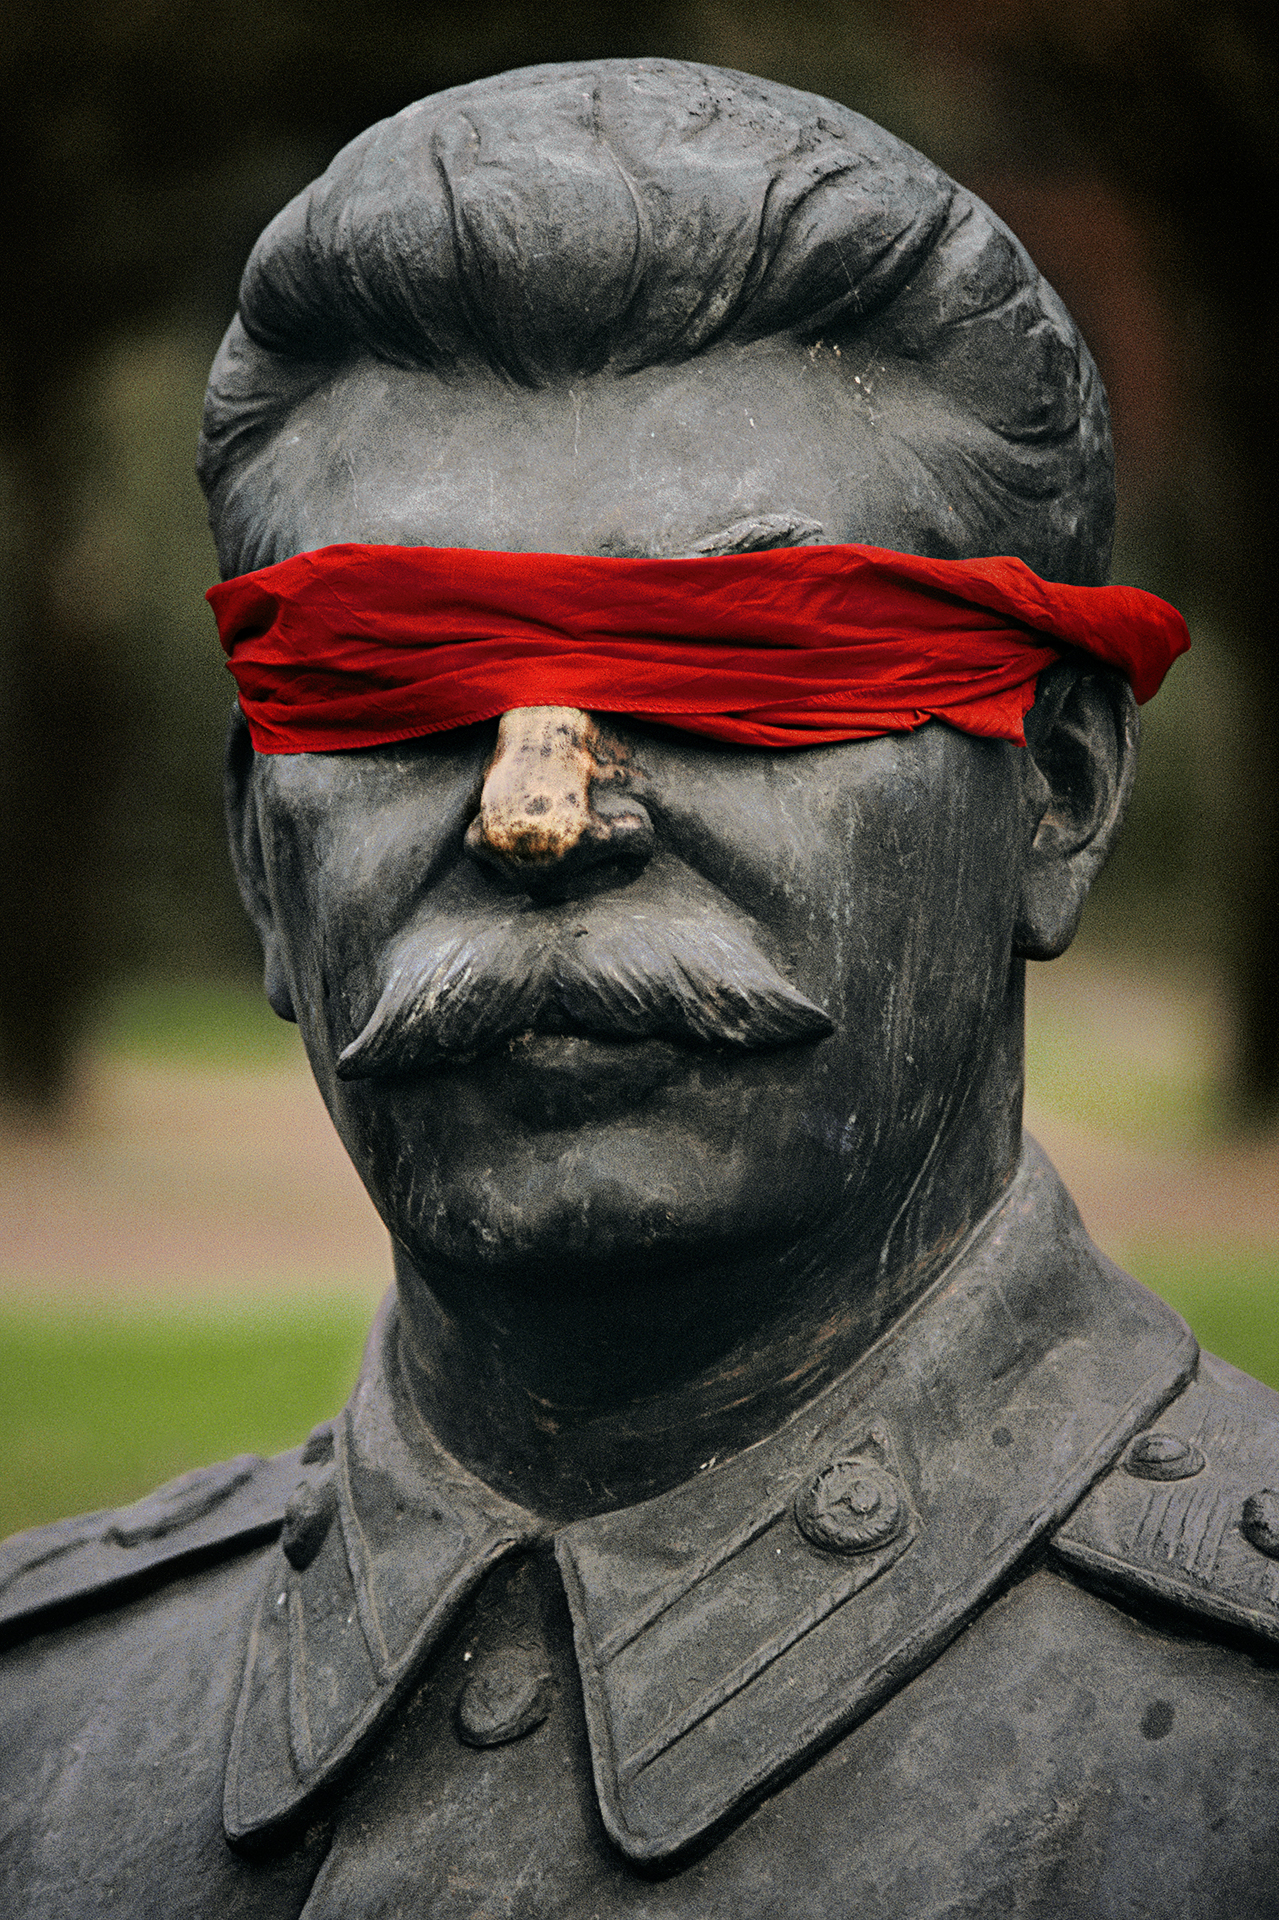  Blindfolded by a child, a statue of Stalin, most feared ruler of the communist era, sits amid other toppled effigies of party leaders now jumbled together in a Moscow park.  Moscow, Russia  